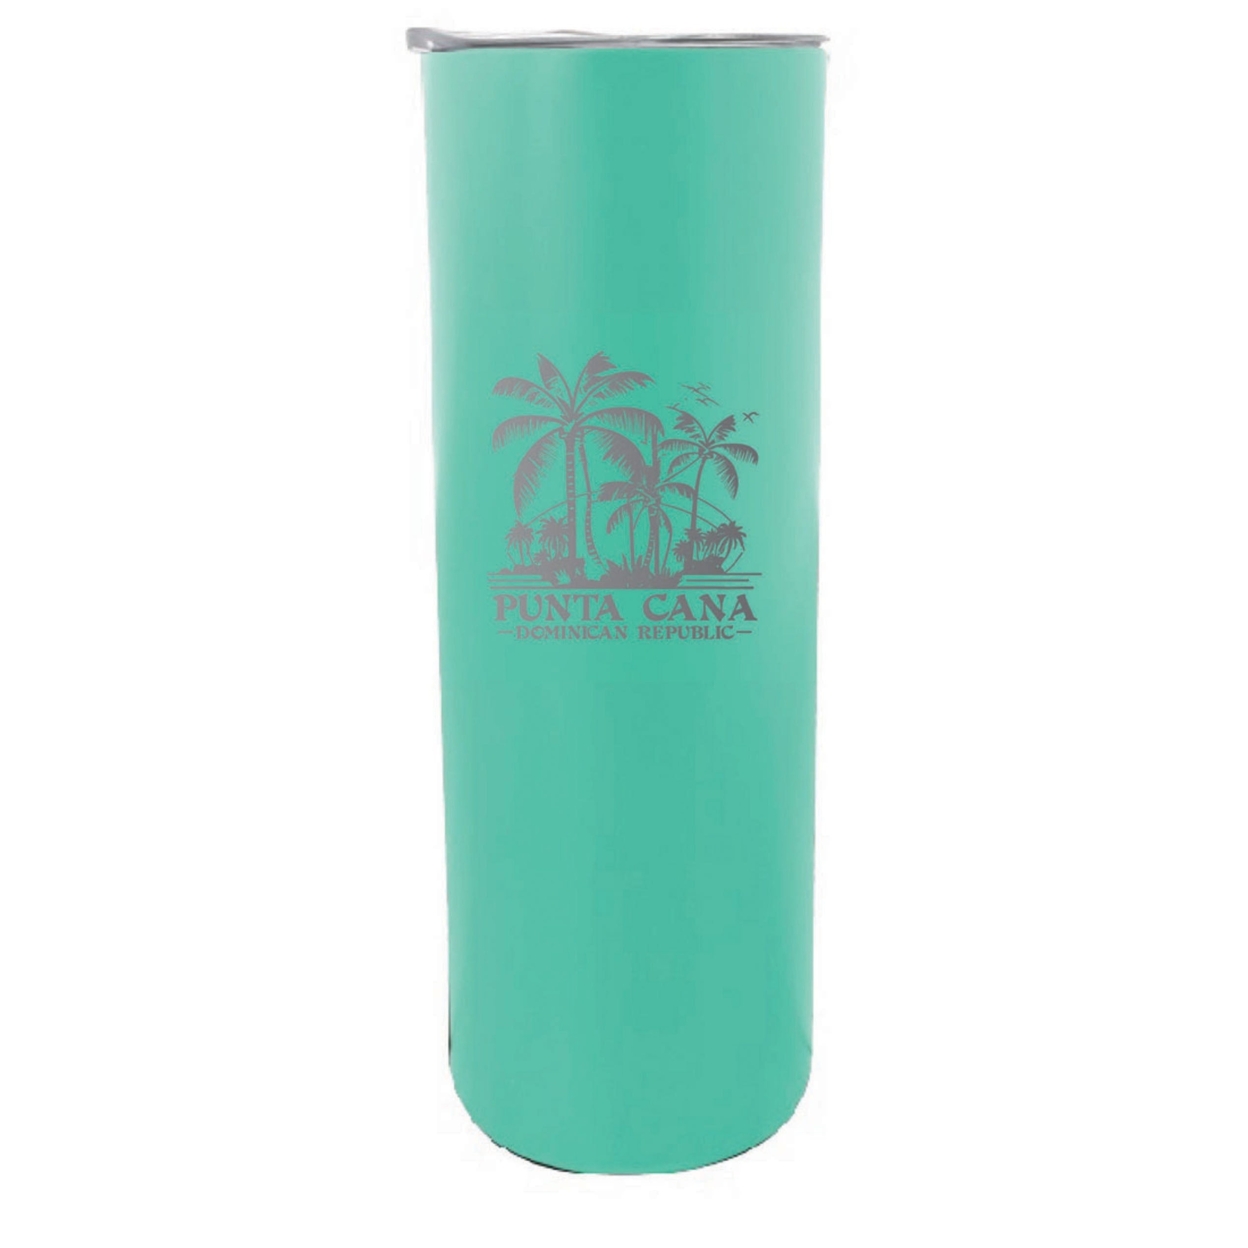 Punta Cana Dominican Republic Souvenir 20 Oz Insulated Stainless Steel Skinny Tumbler Etched - Navy, PALMS